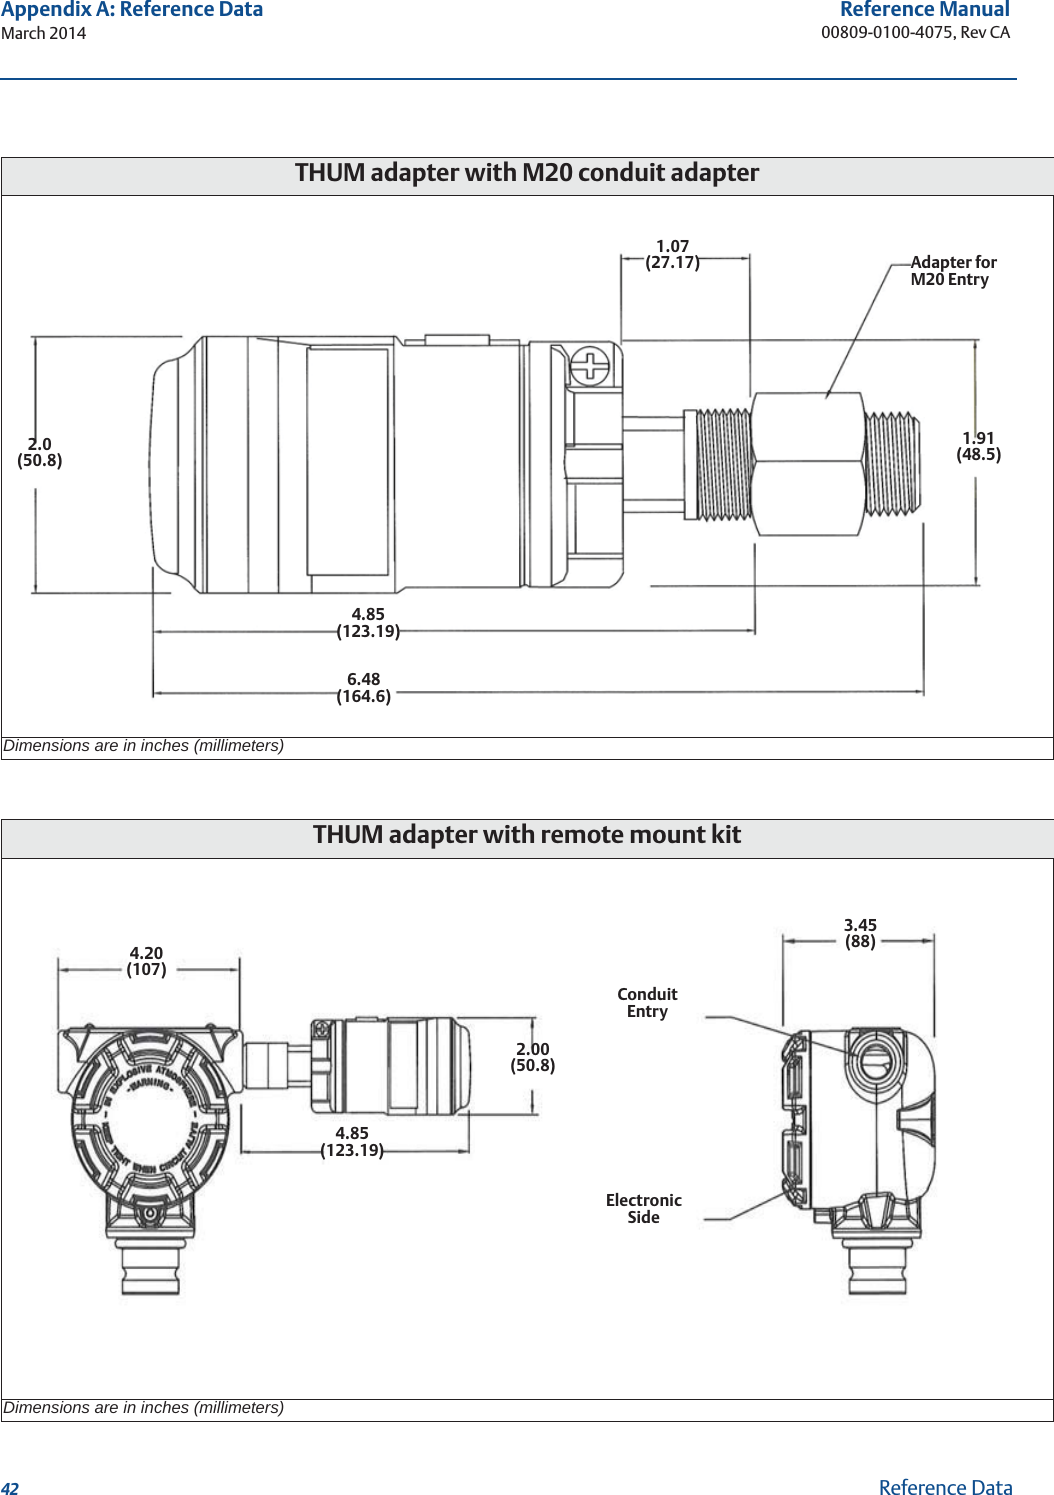 42Reference Manual00809-0100-4075, Rev CAAppendix A: Reference DataMarch 2014Reference DataTHUM adapter with M20 conduit adapterDimensions are in inches (millimeters)THUM adapter with remote mount kitDimensions are in inches (millimeters)1.07(27.17)1.91(48.5)4.85(123.19)2.0(50.8)6.48(164.6)Adapter for M20 Entry4.20(107)4.85(123.19)2.00(50.8)3.45(88)Conduit EntryElectronic Side